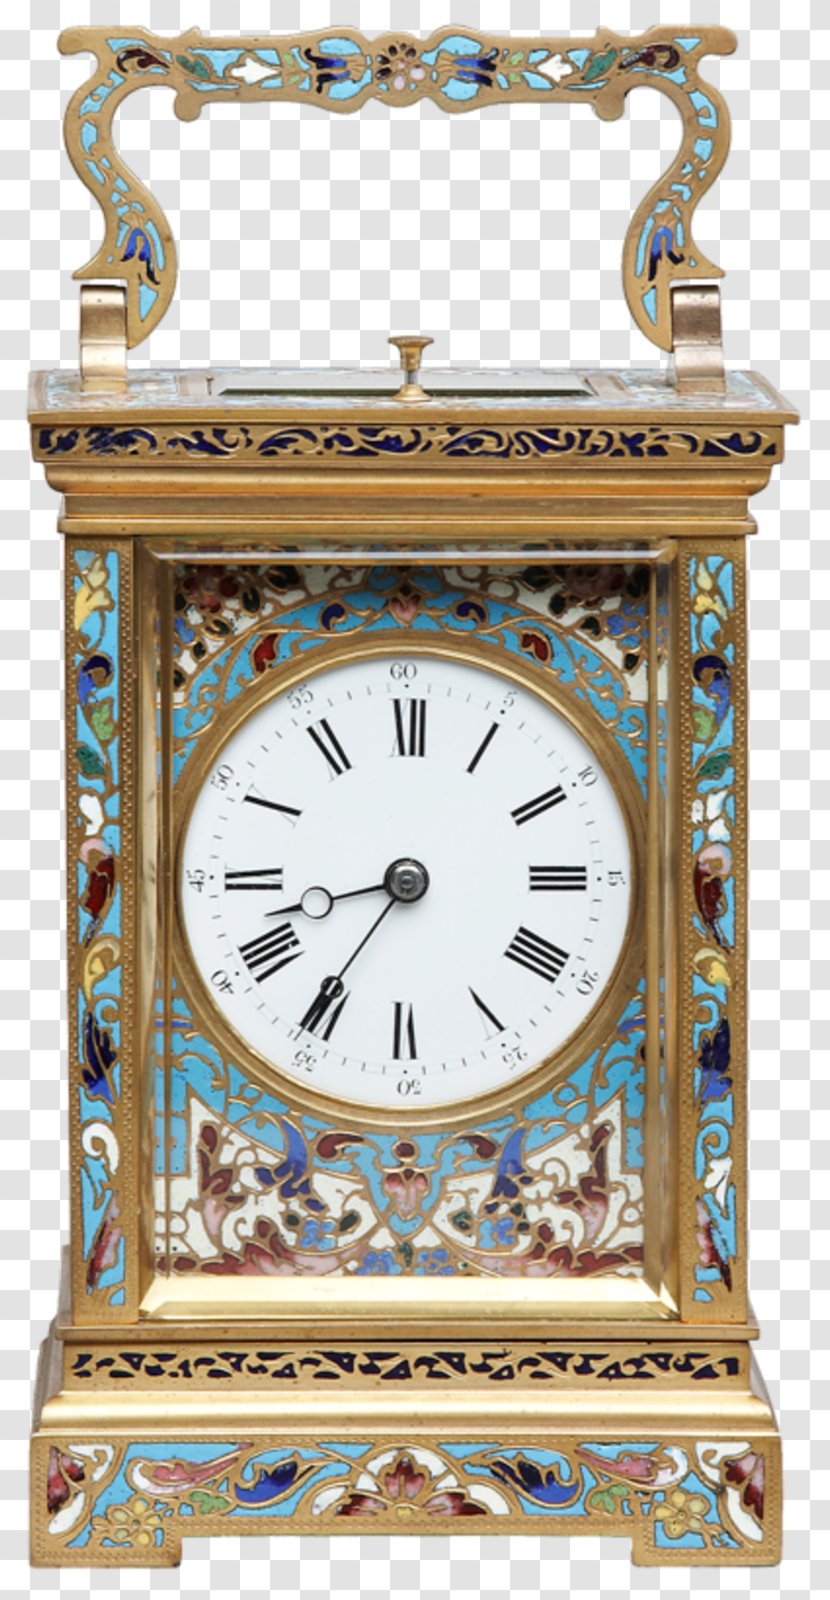 Carriage Clock Antique Clothing Accessories J Carlton Smith - Home - Vintage Transparent PNG